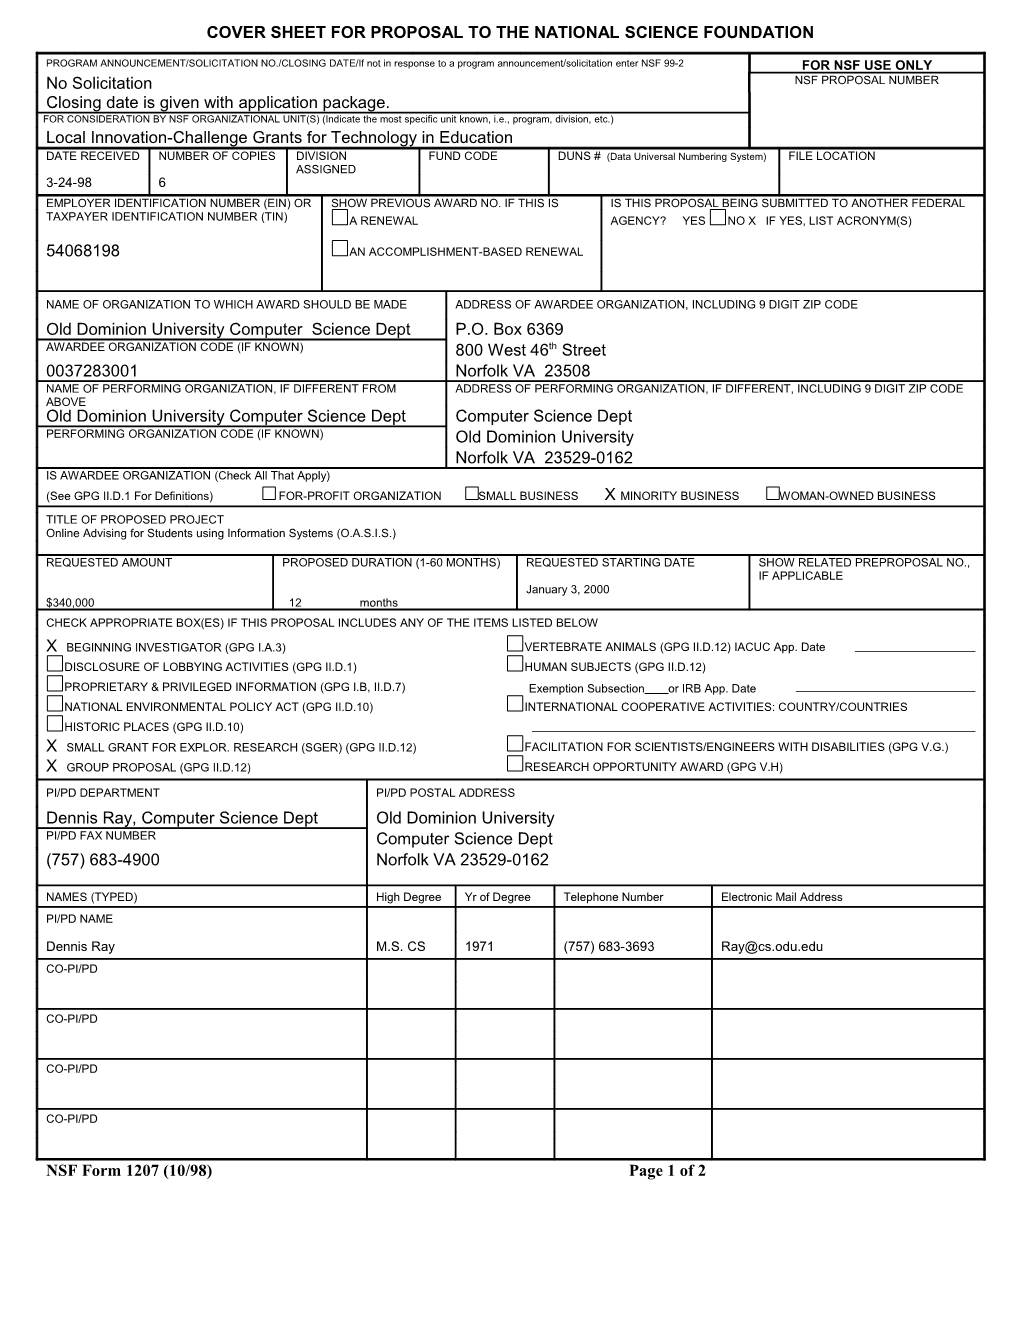 NSF Form 1207 (10/98) Page 1 of 2